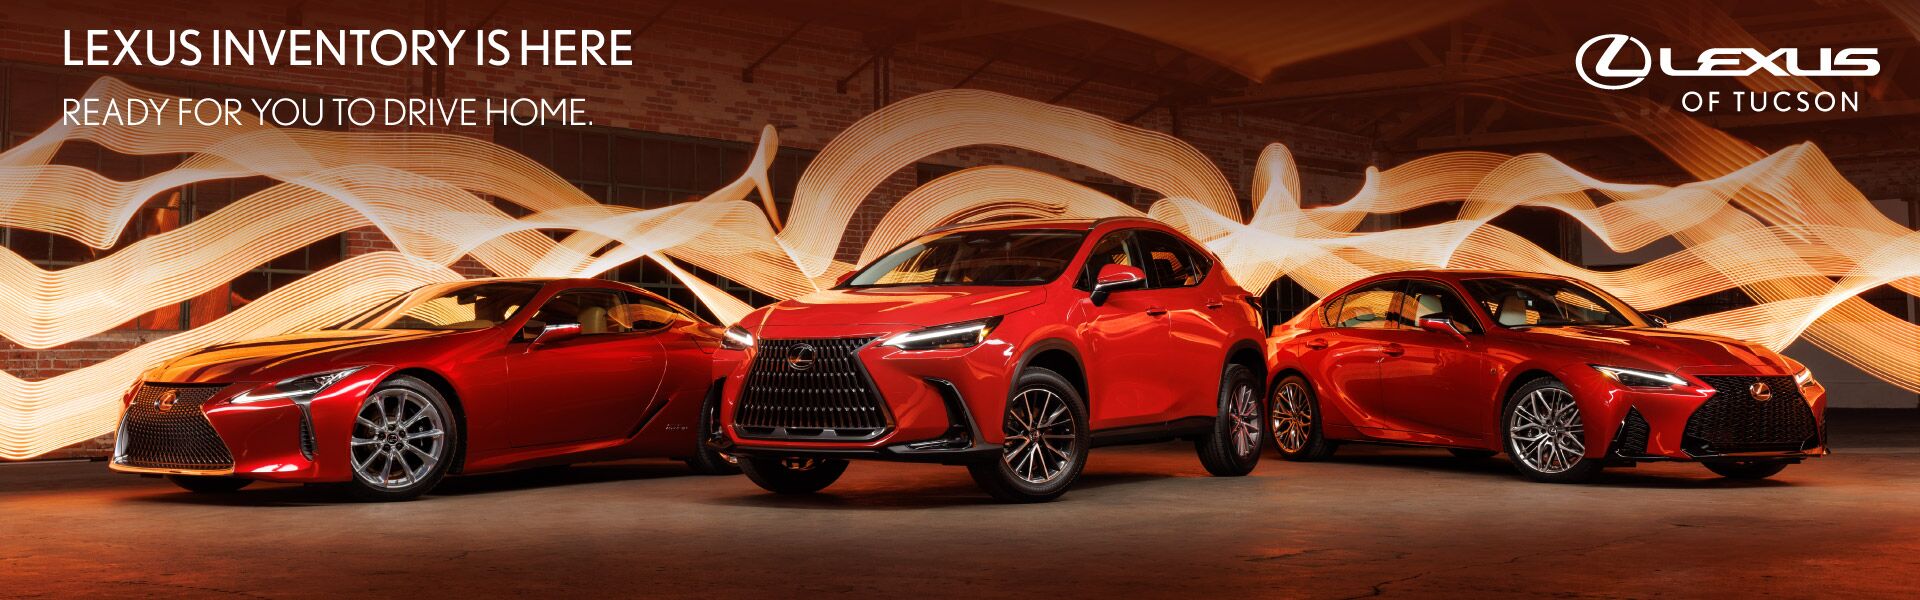 Search All New Vehicels at Lexus of Tucson Auto Mall Tucson AZ